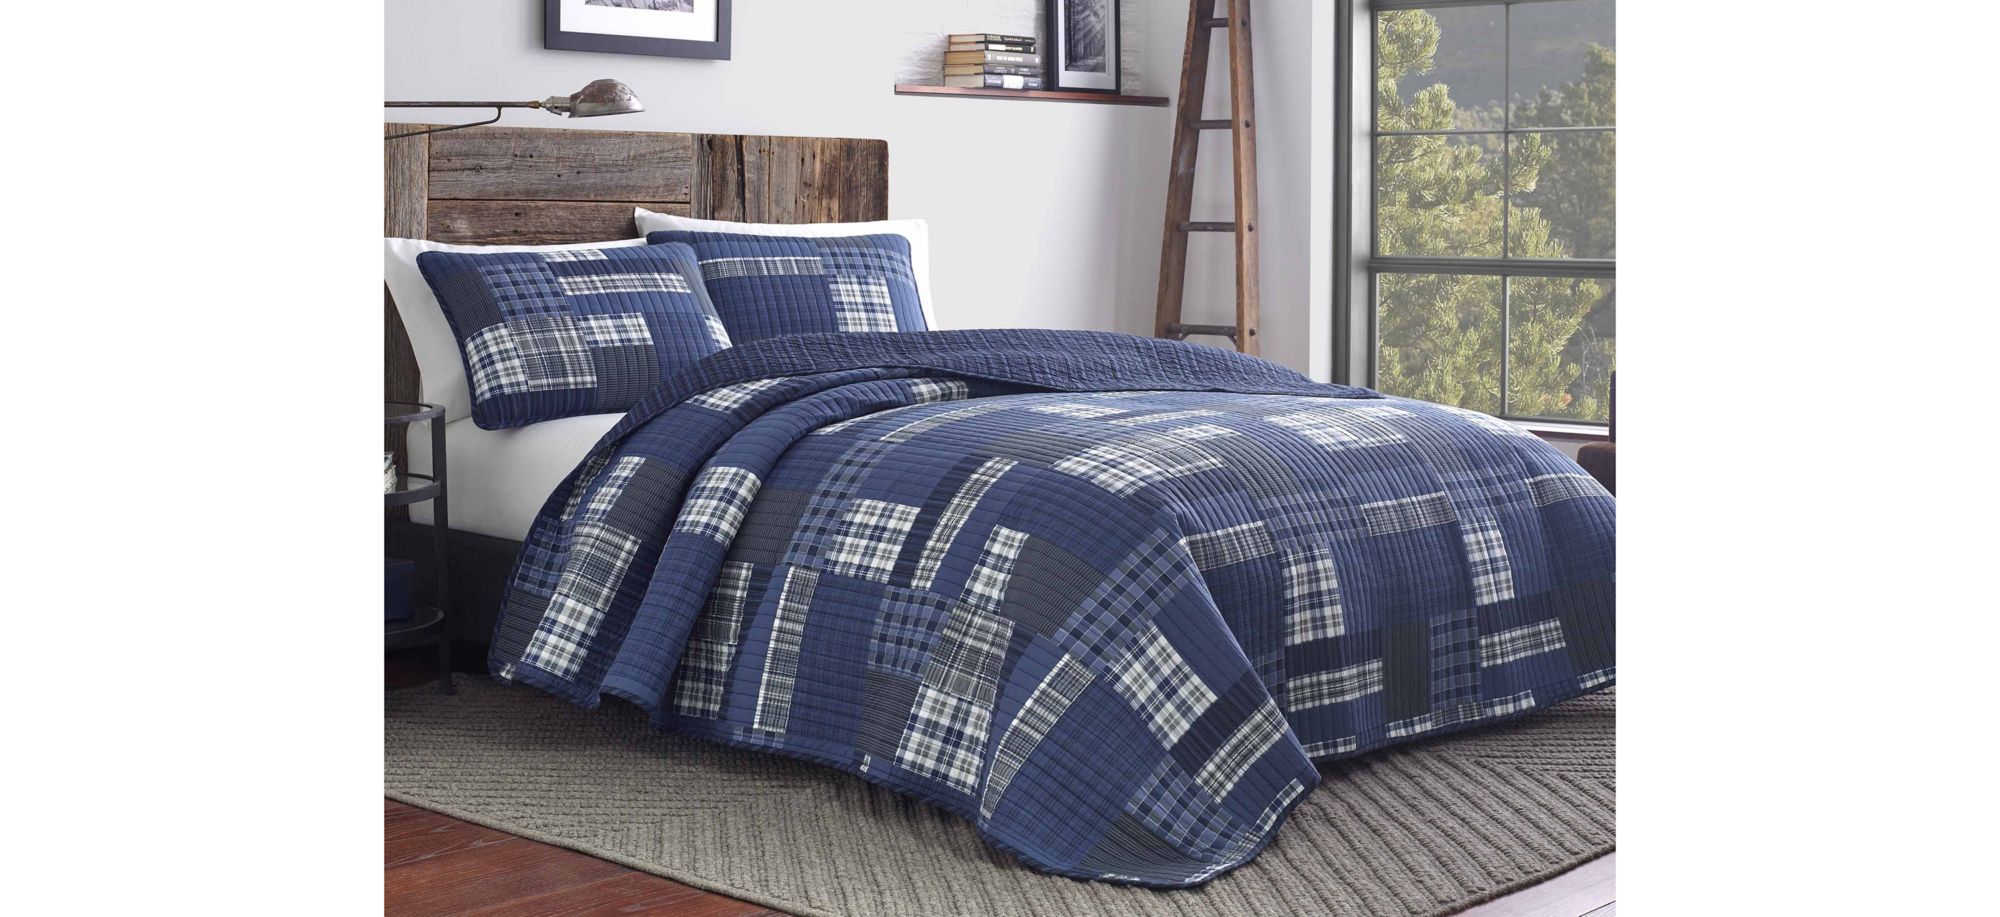 Eastmont 2-pc.Quilt Set in NAVY by Revman International